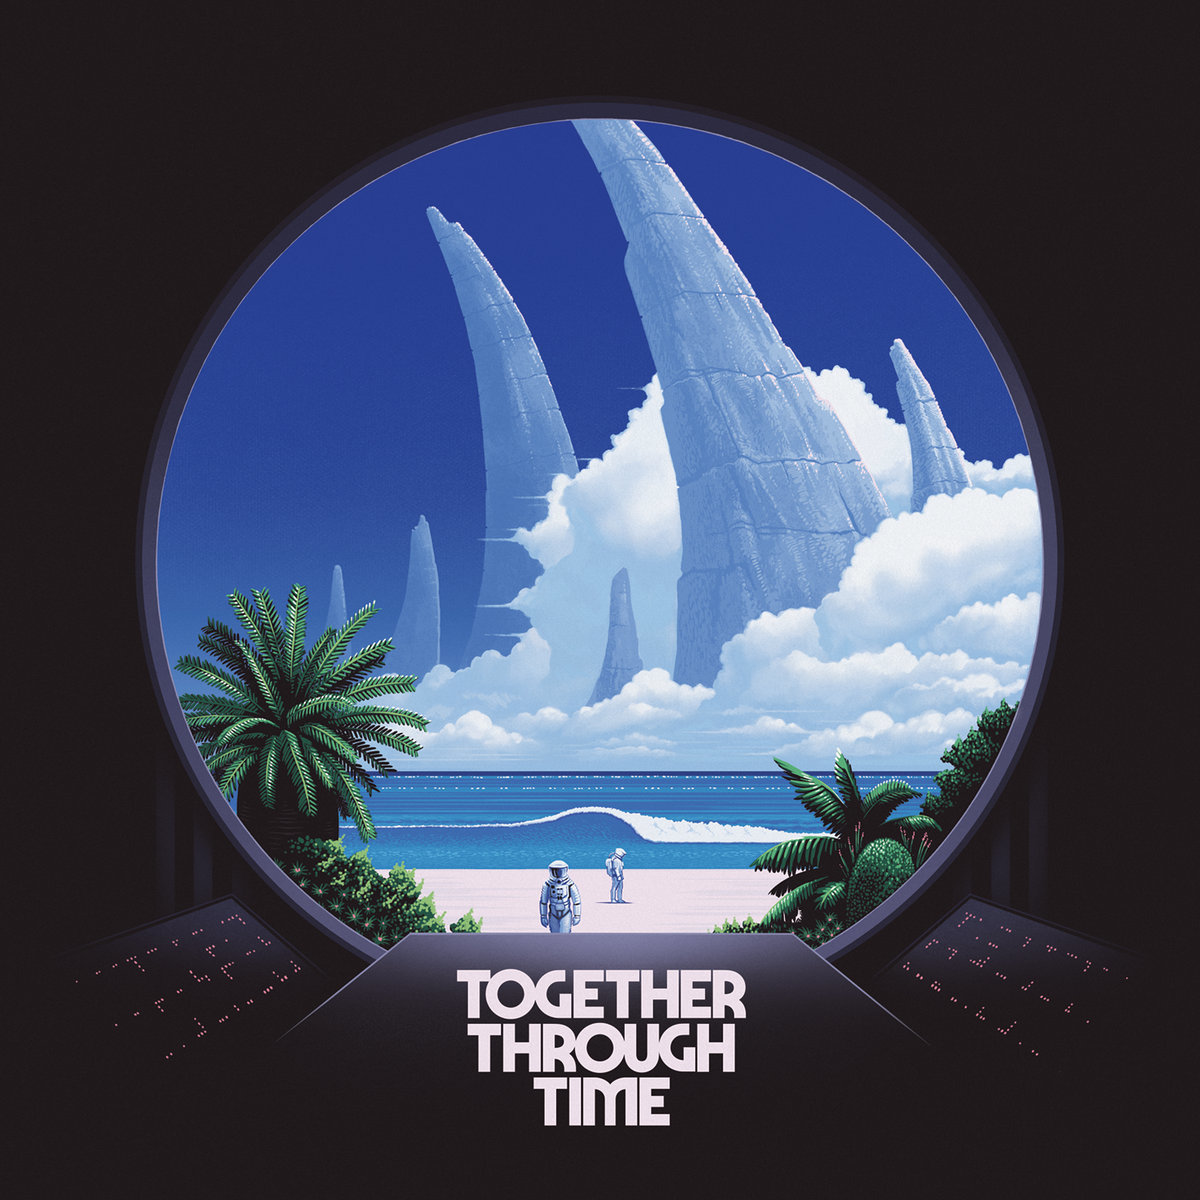 Together Through Time Twrp もつれた生活